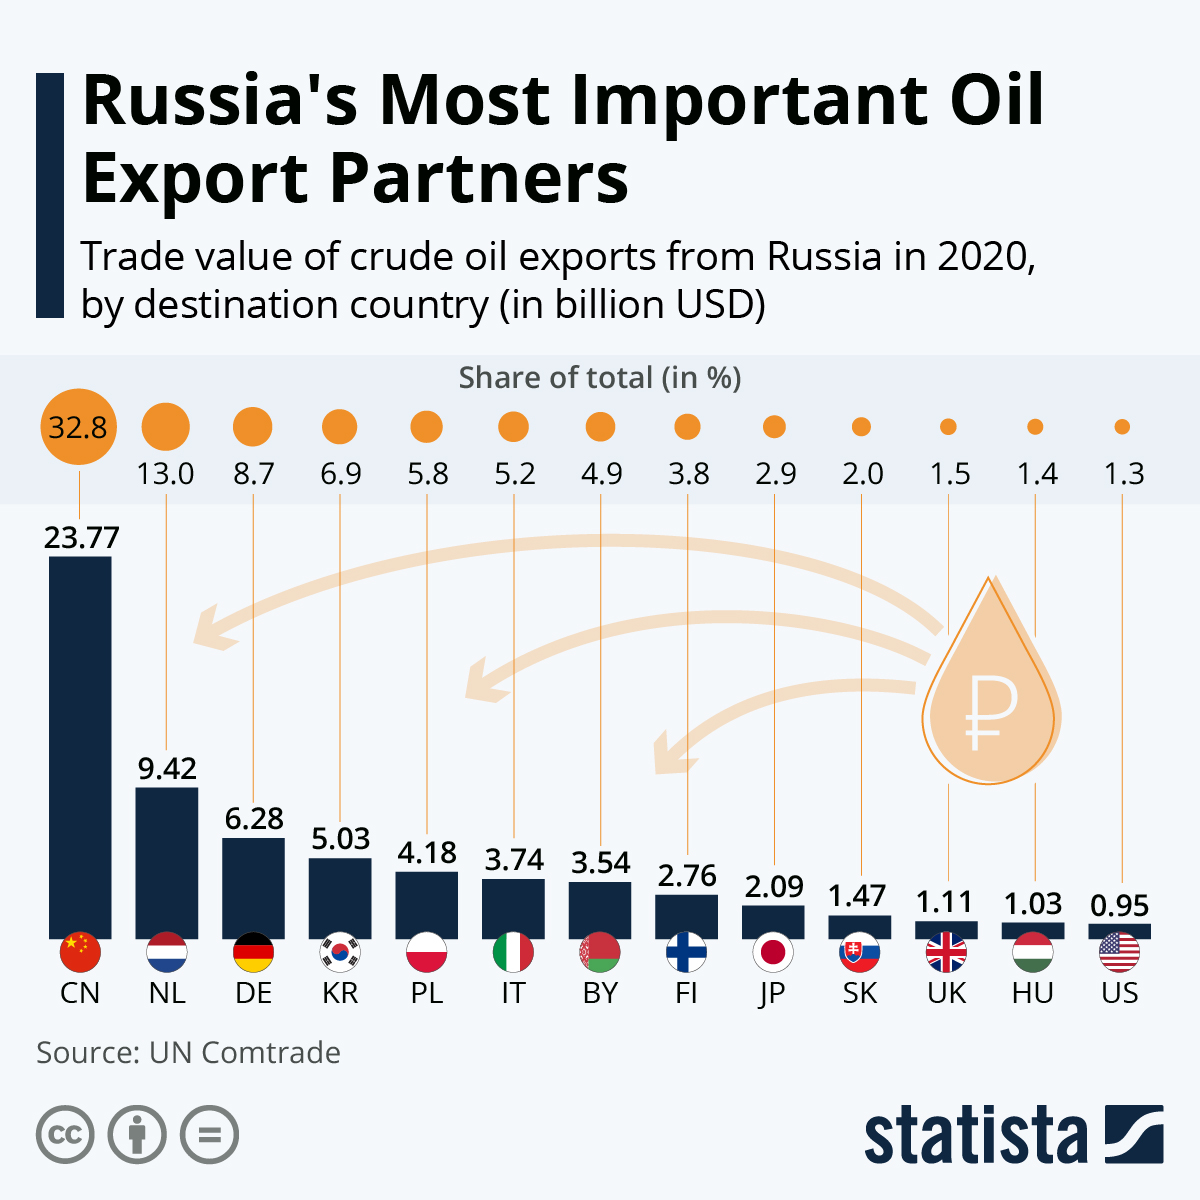 Russia's Most Important Oil Export Partners
